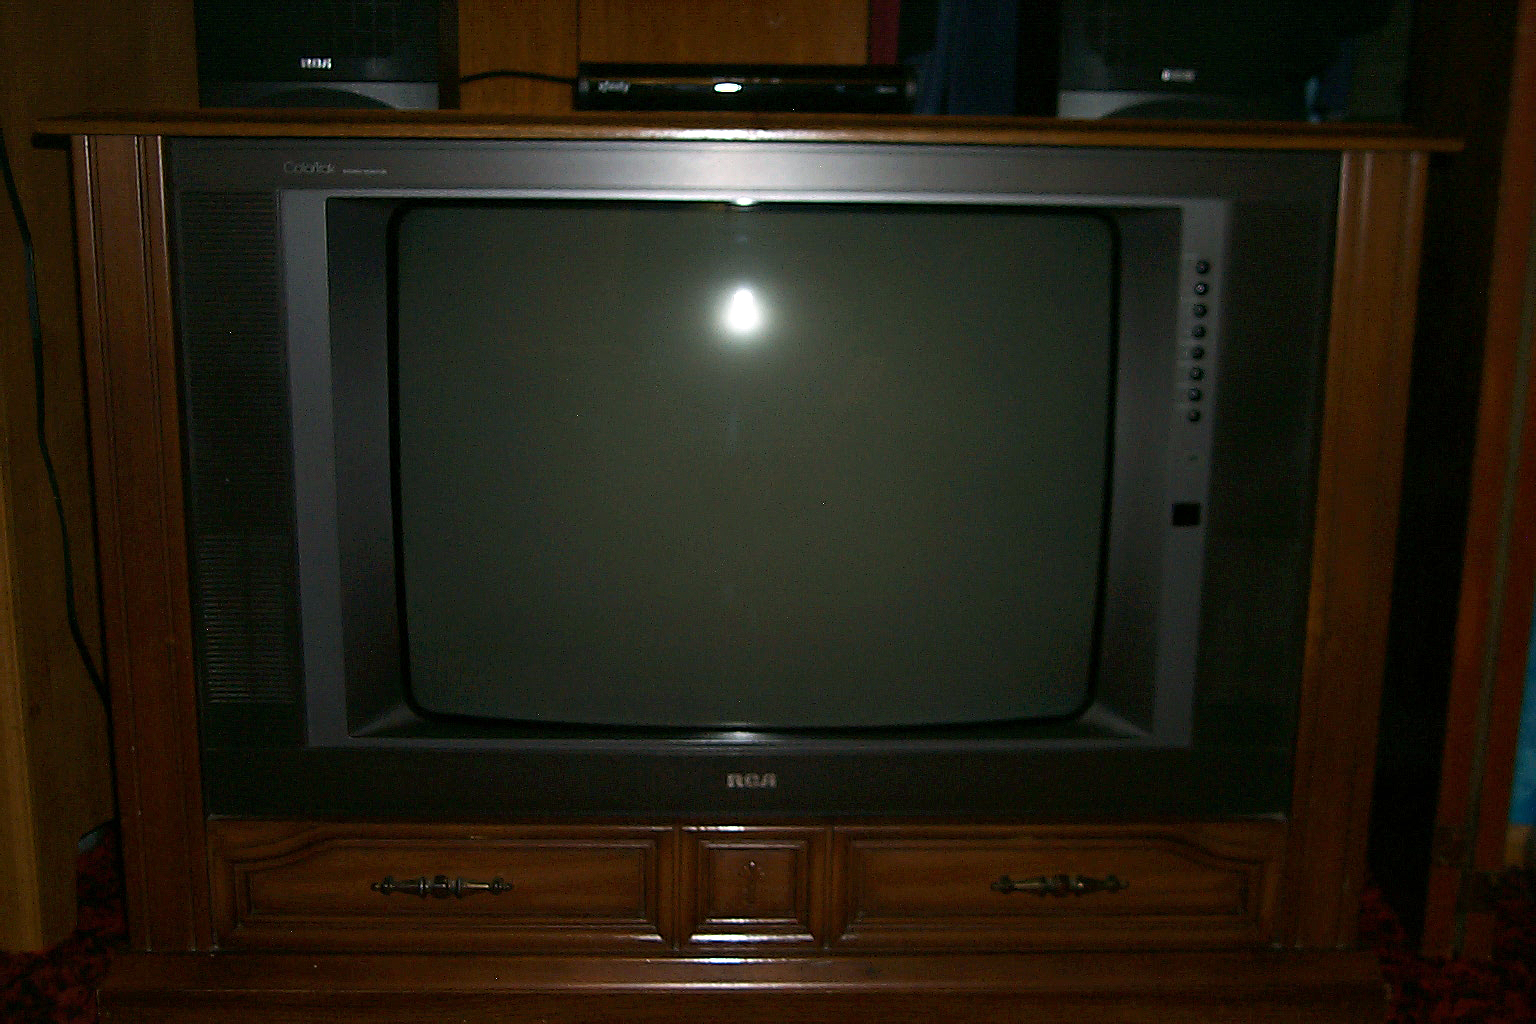 Helpful Tech Repair: 1991 RCA 25 Inch Cabinet TV Review & Possibile Mod